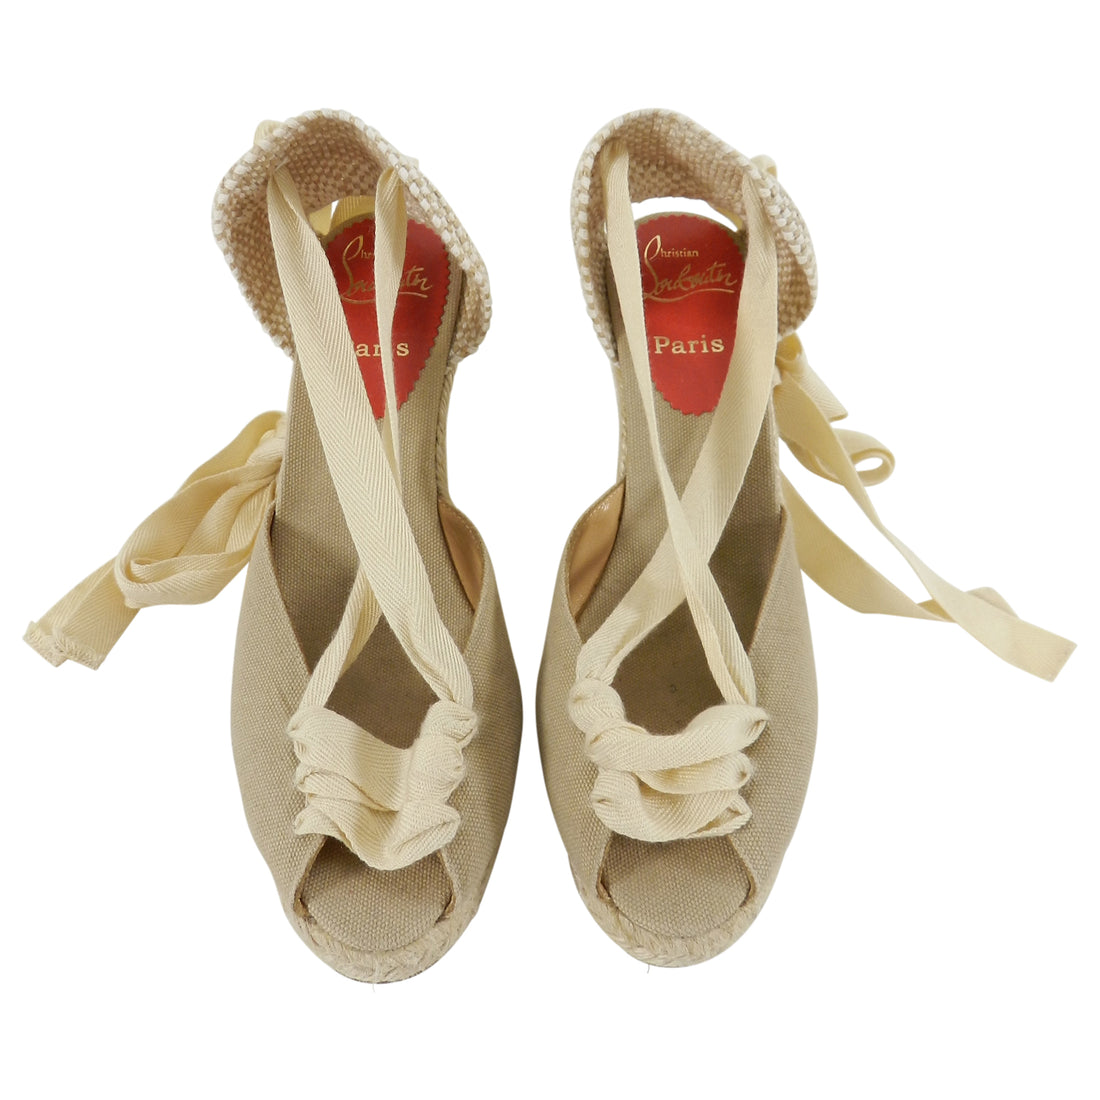 Christian Louboutin Canvas Espadrille Wedge Shoes – 37